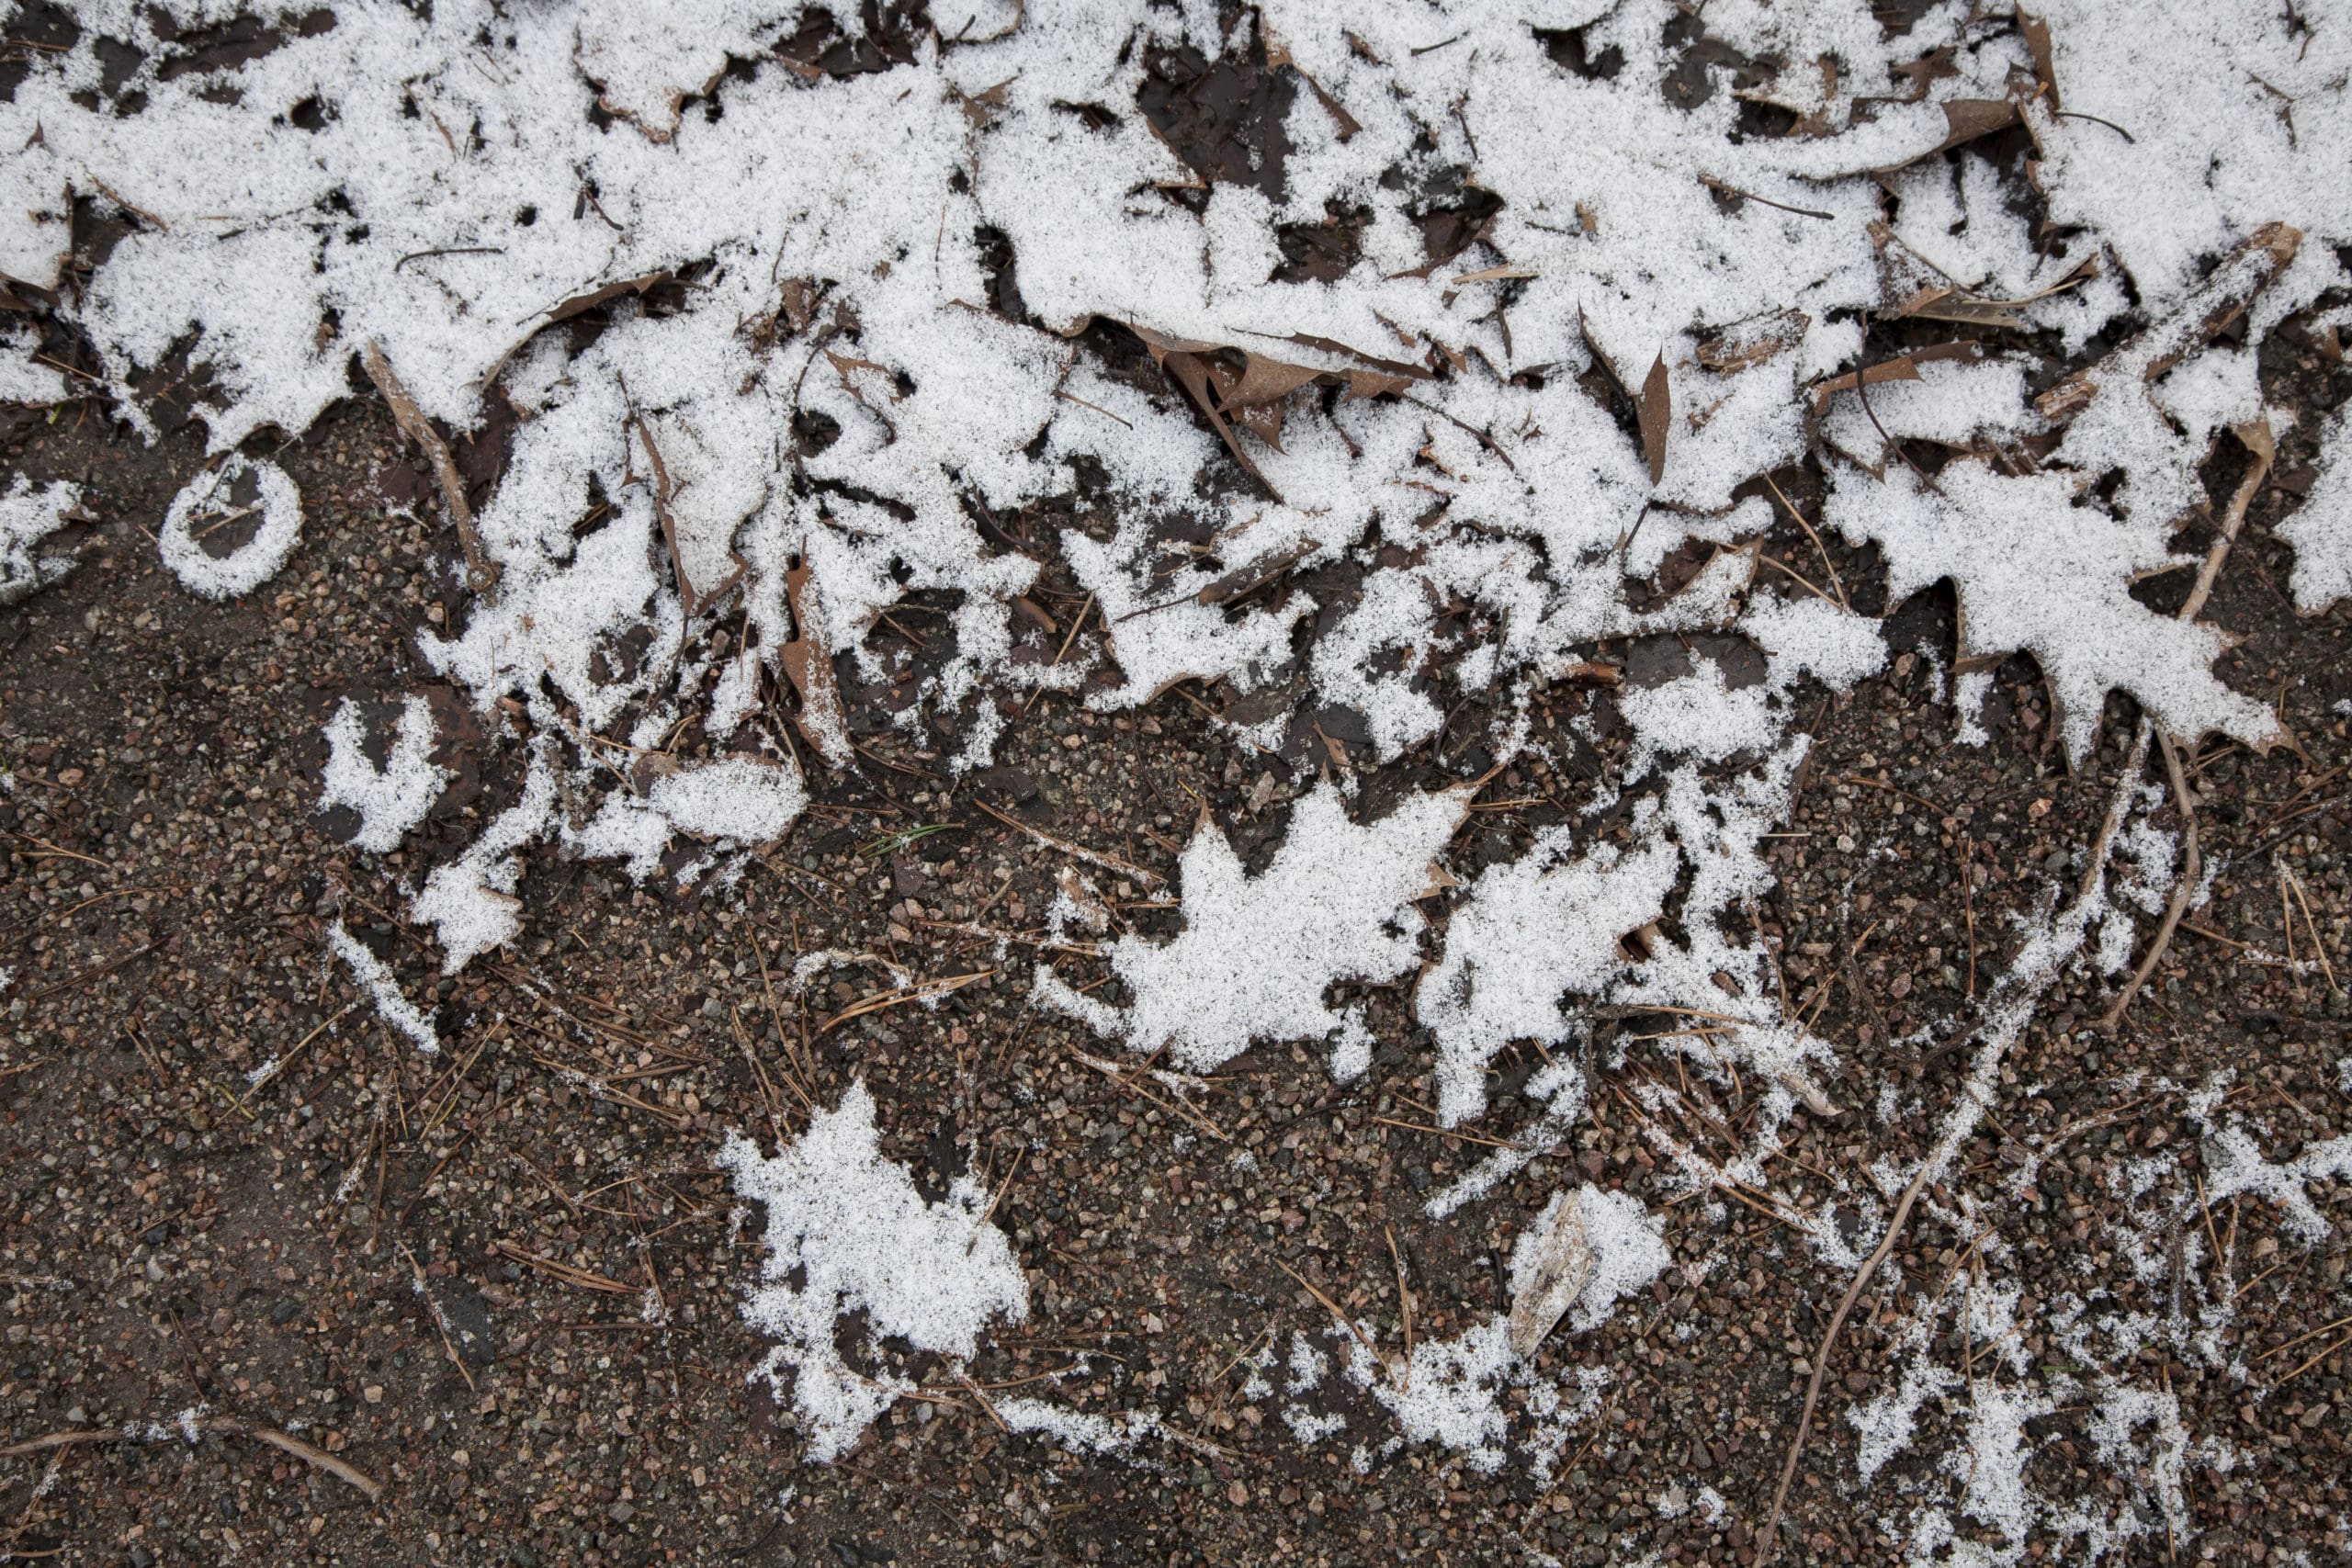 snow on leaves on the ground, likely frozen making it more difficult to dig